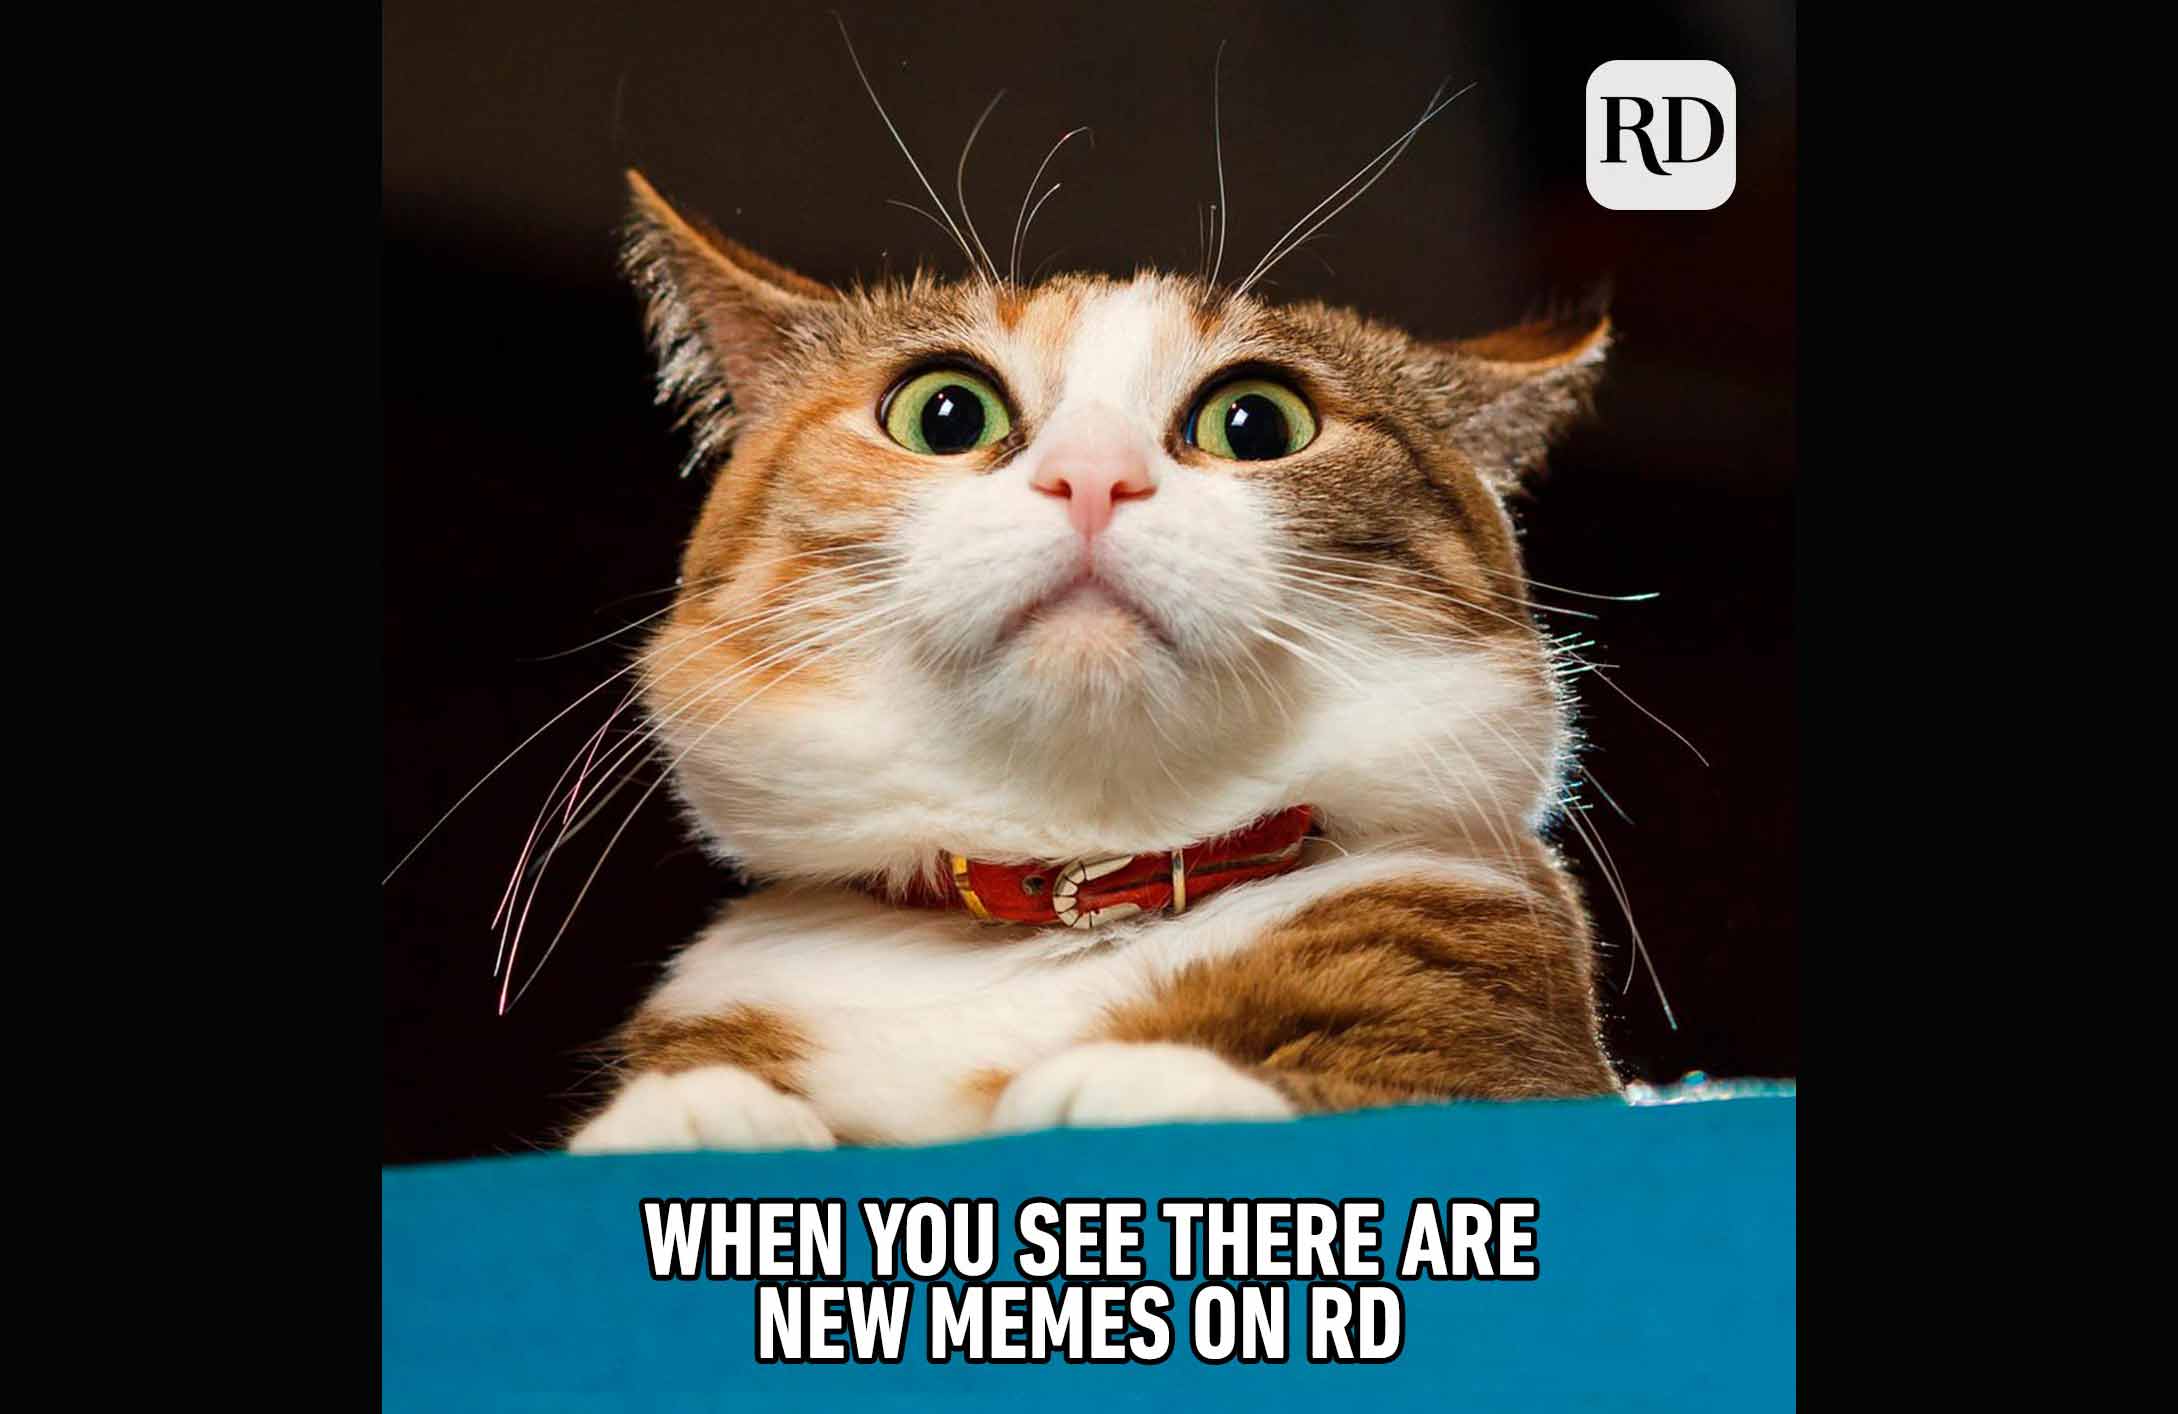 15 funny animal memes you can't help but laugh at | Reader's Digest  Australia